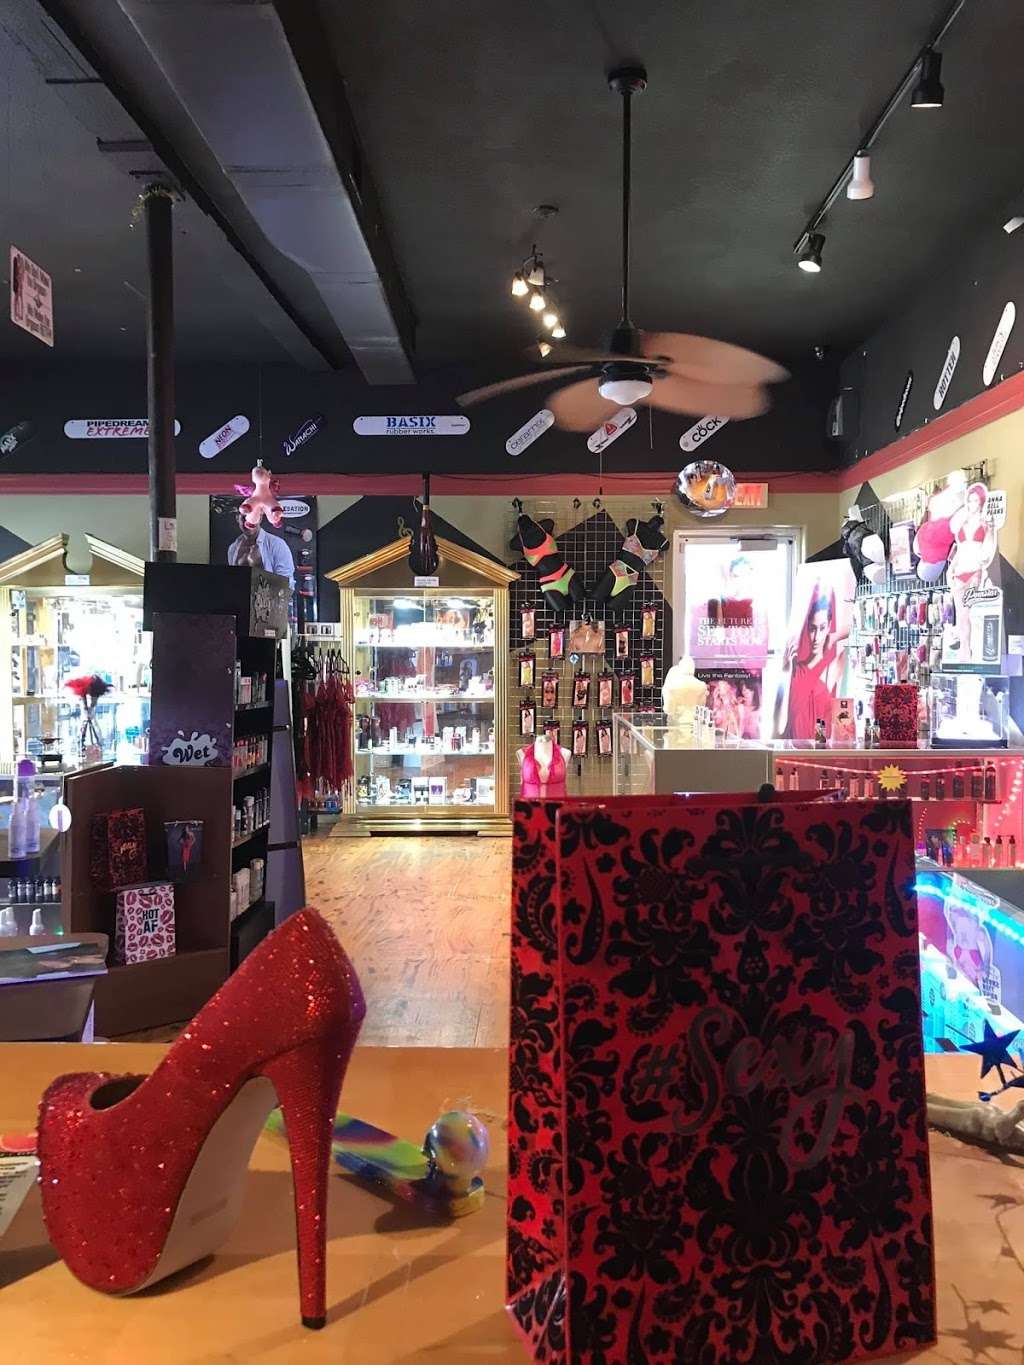 Wild Things Lingerie & Adult Novelty Store - clothing store  | Photo 4 of 9 | Address: 5340 E Silver Springs Blvd, Silver Springs, FL 34488, USA | Phone: (352) 236-5298